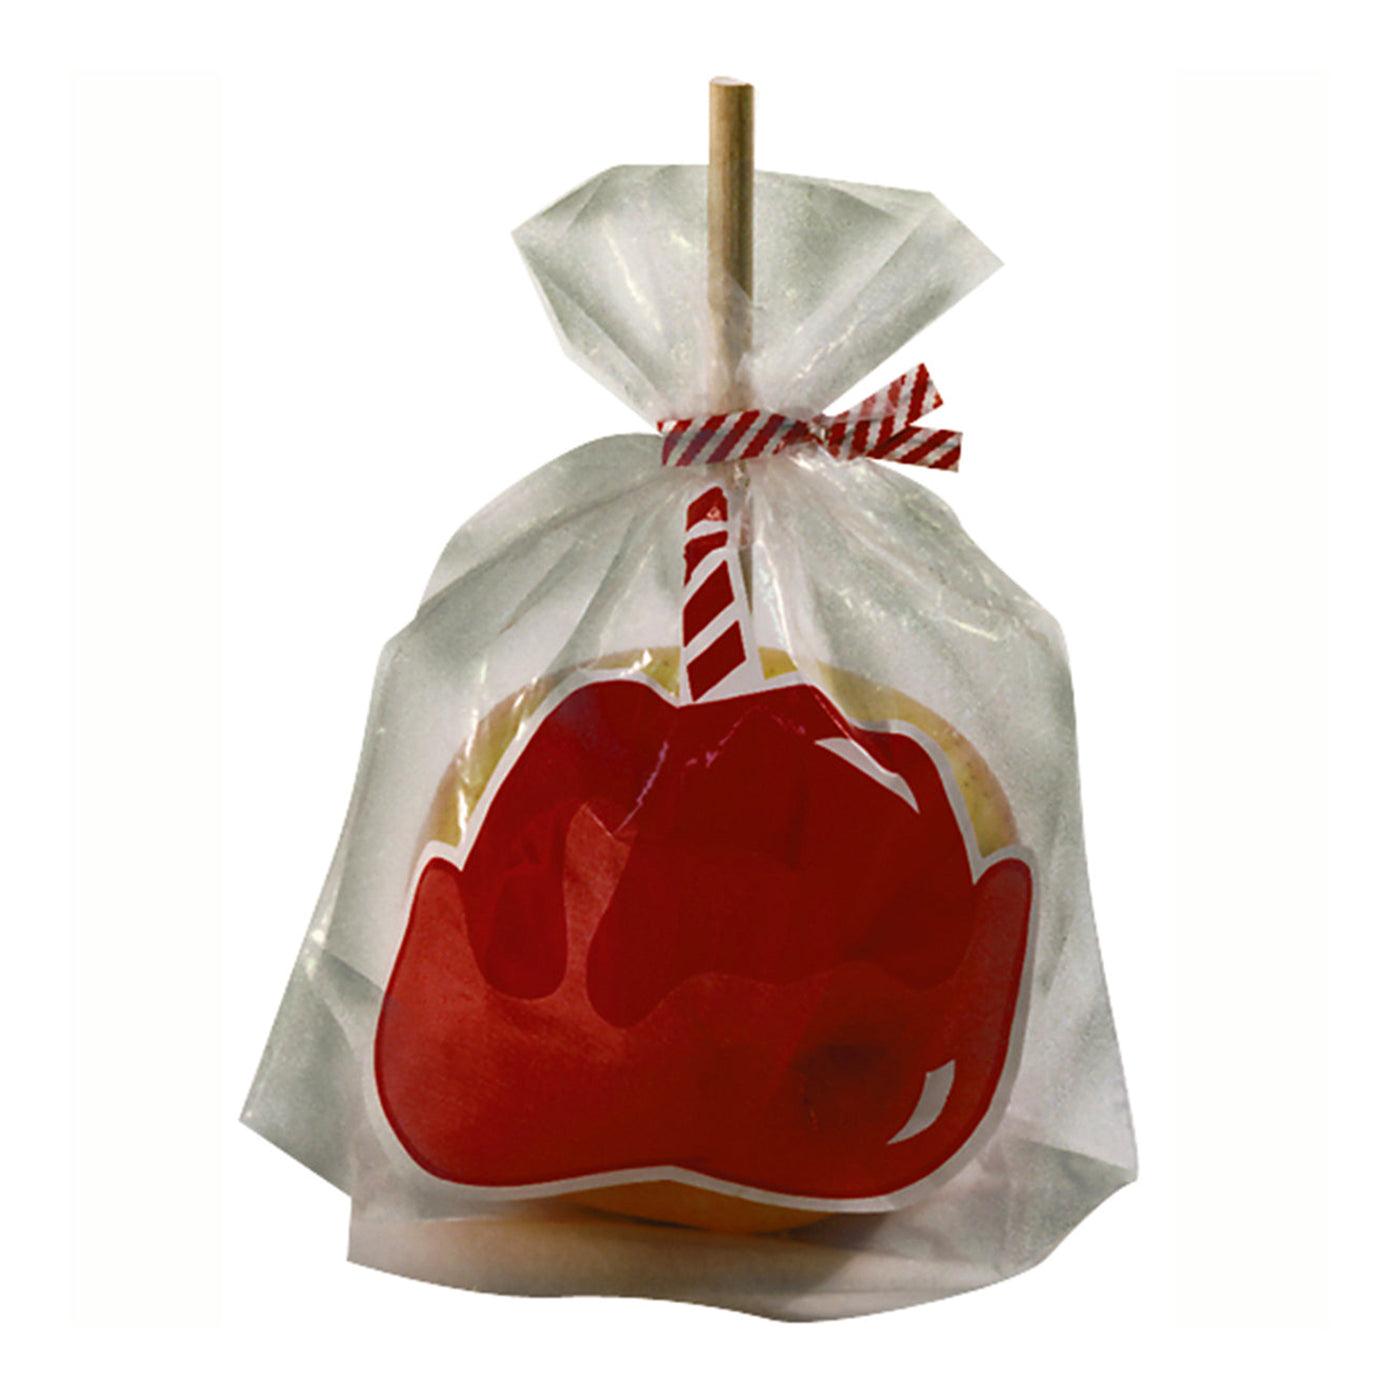 Gift Bag Ideas: clear cellophane bags with candies inside